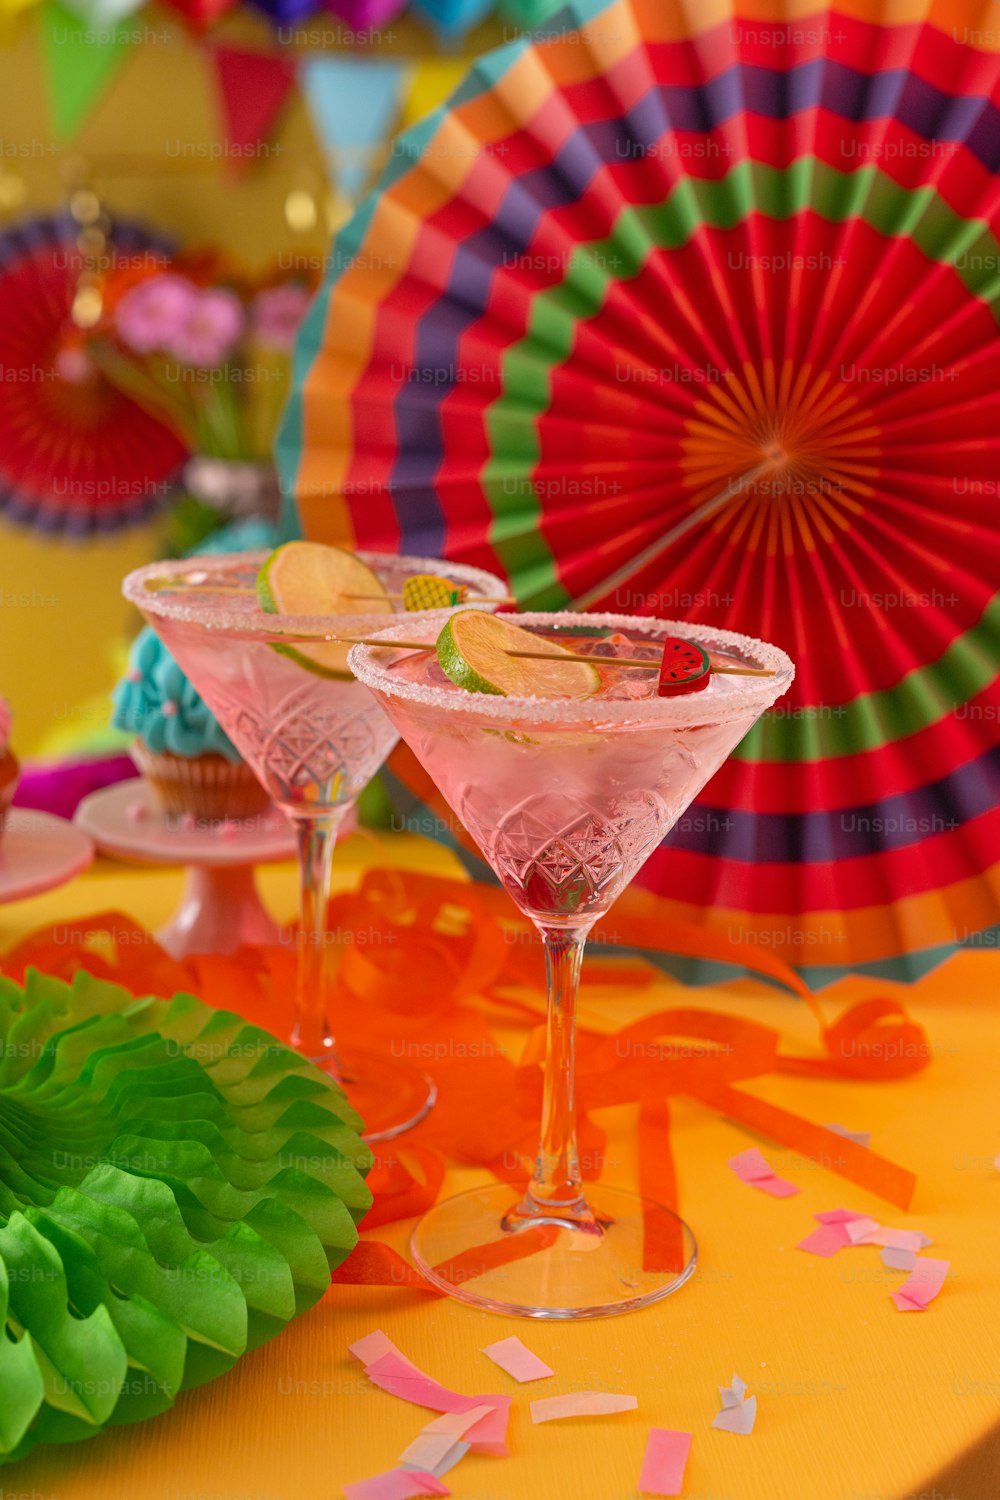 a table topped with two martini glasses filled with pink liquid